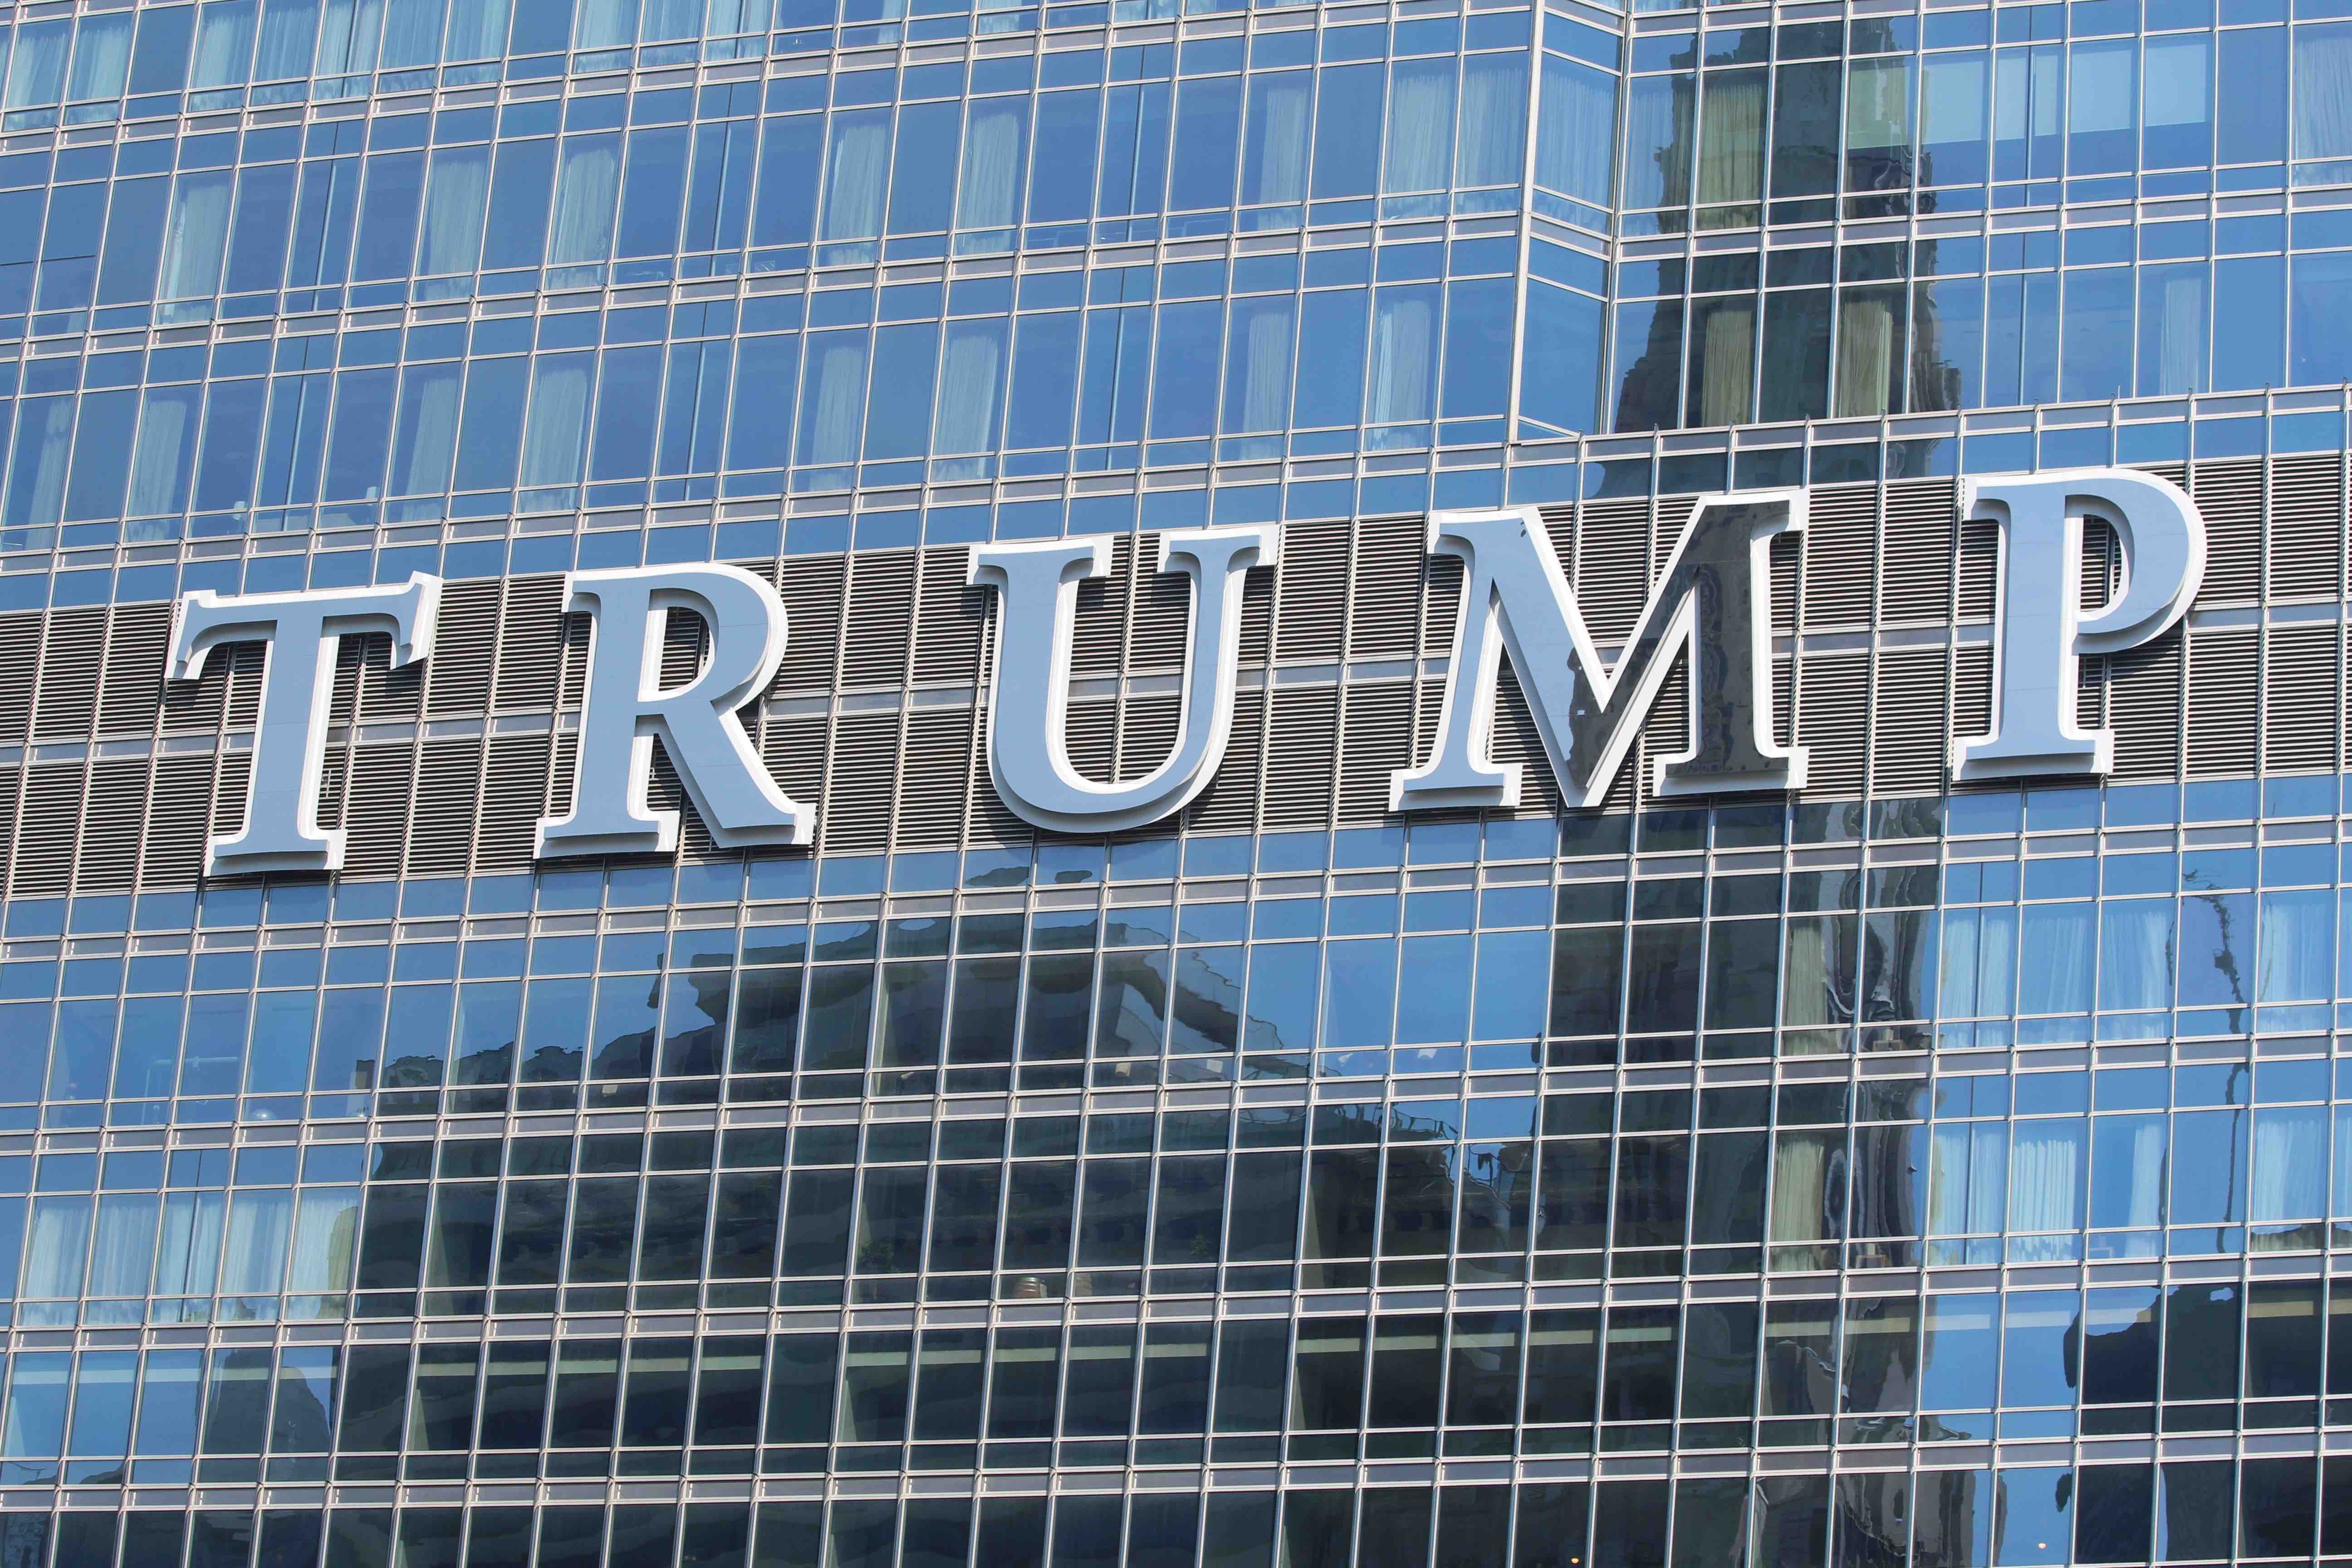 trump tower sign